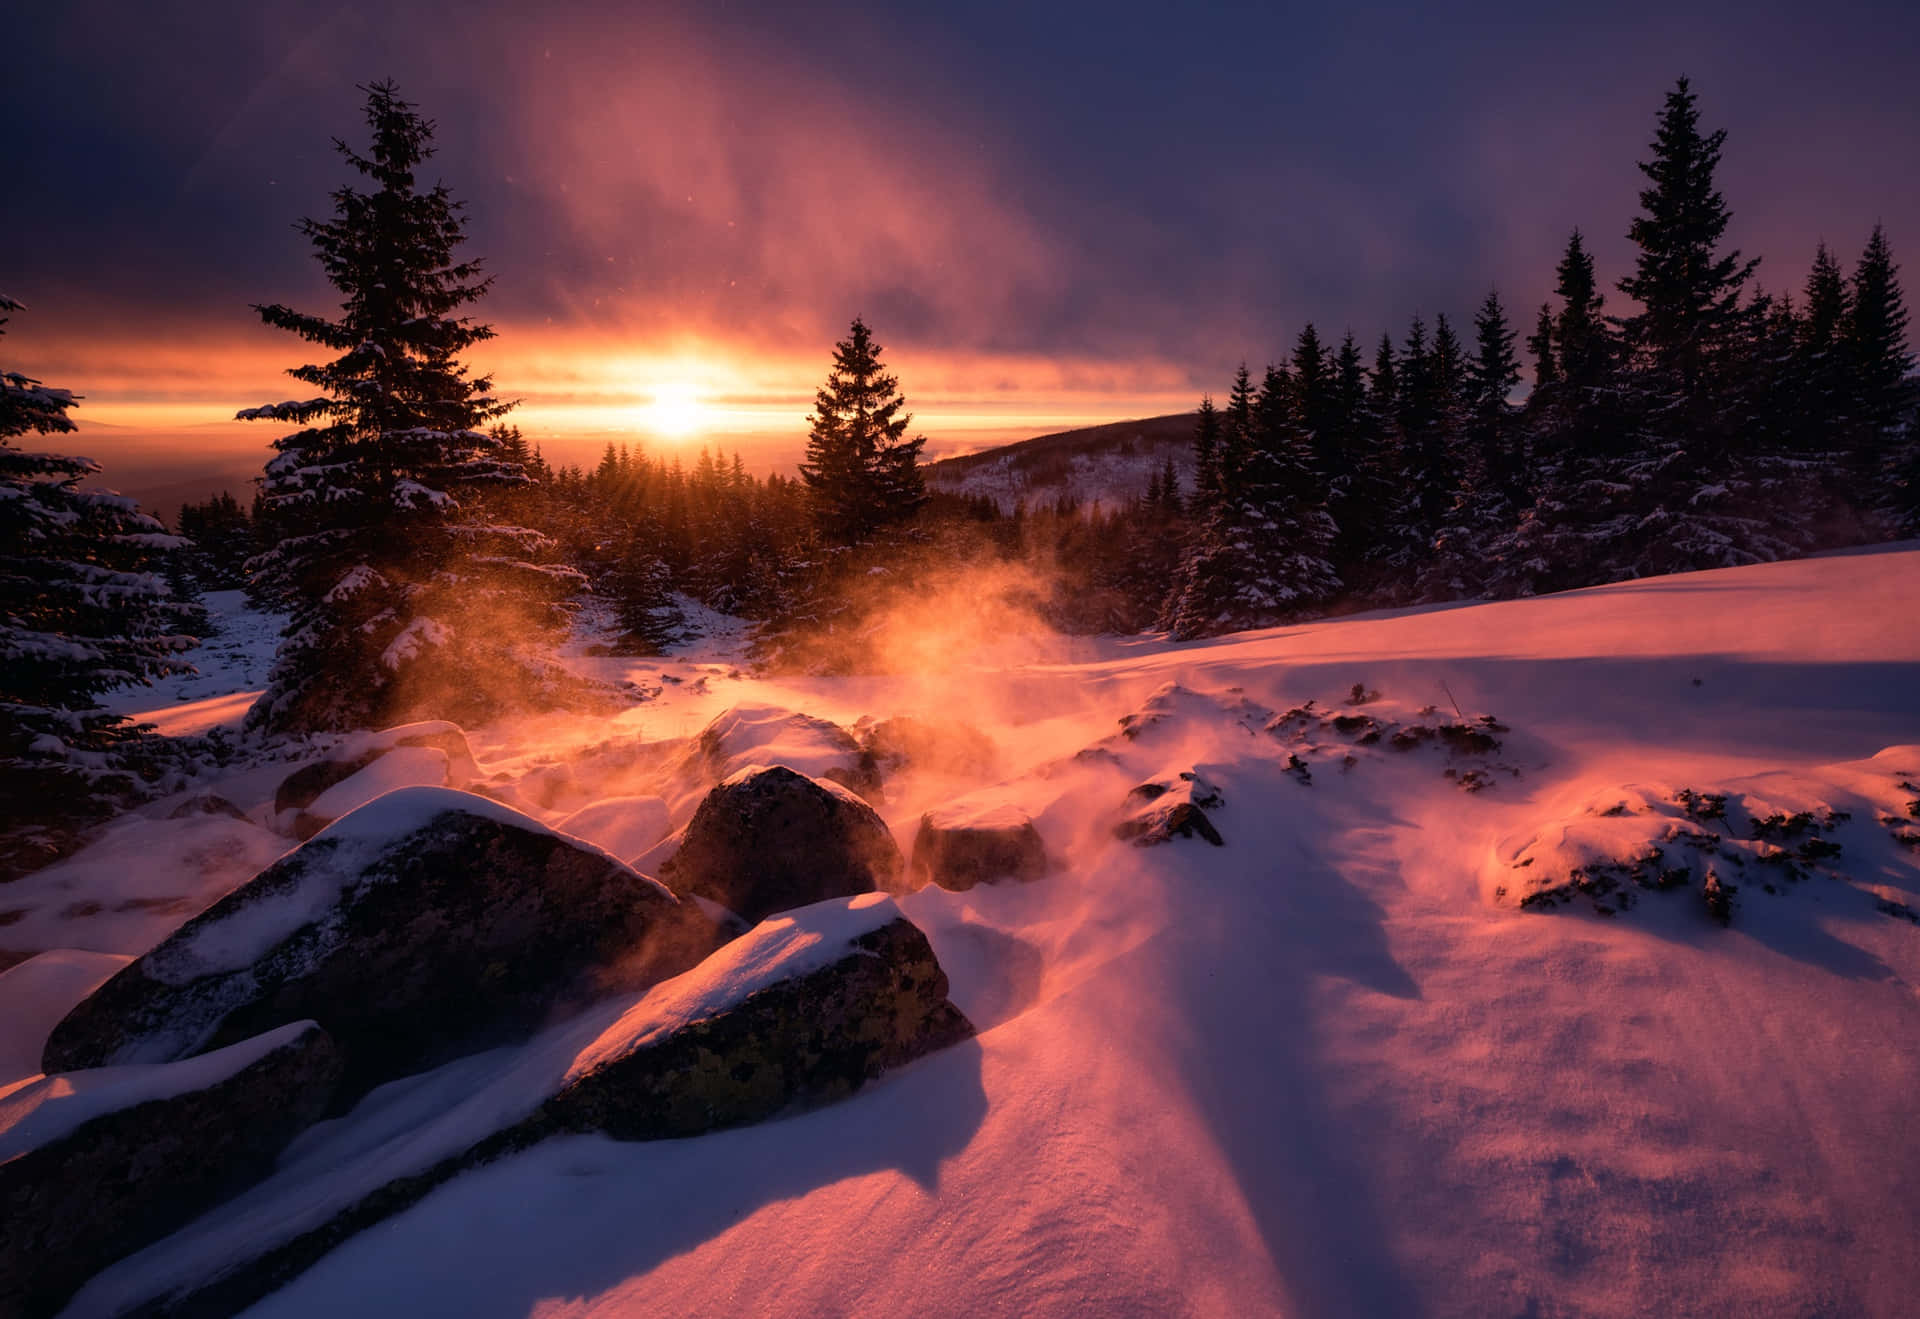 "A Majestic Winter Sunset Over a Snowy Landscape" Wallpaper